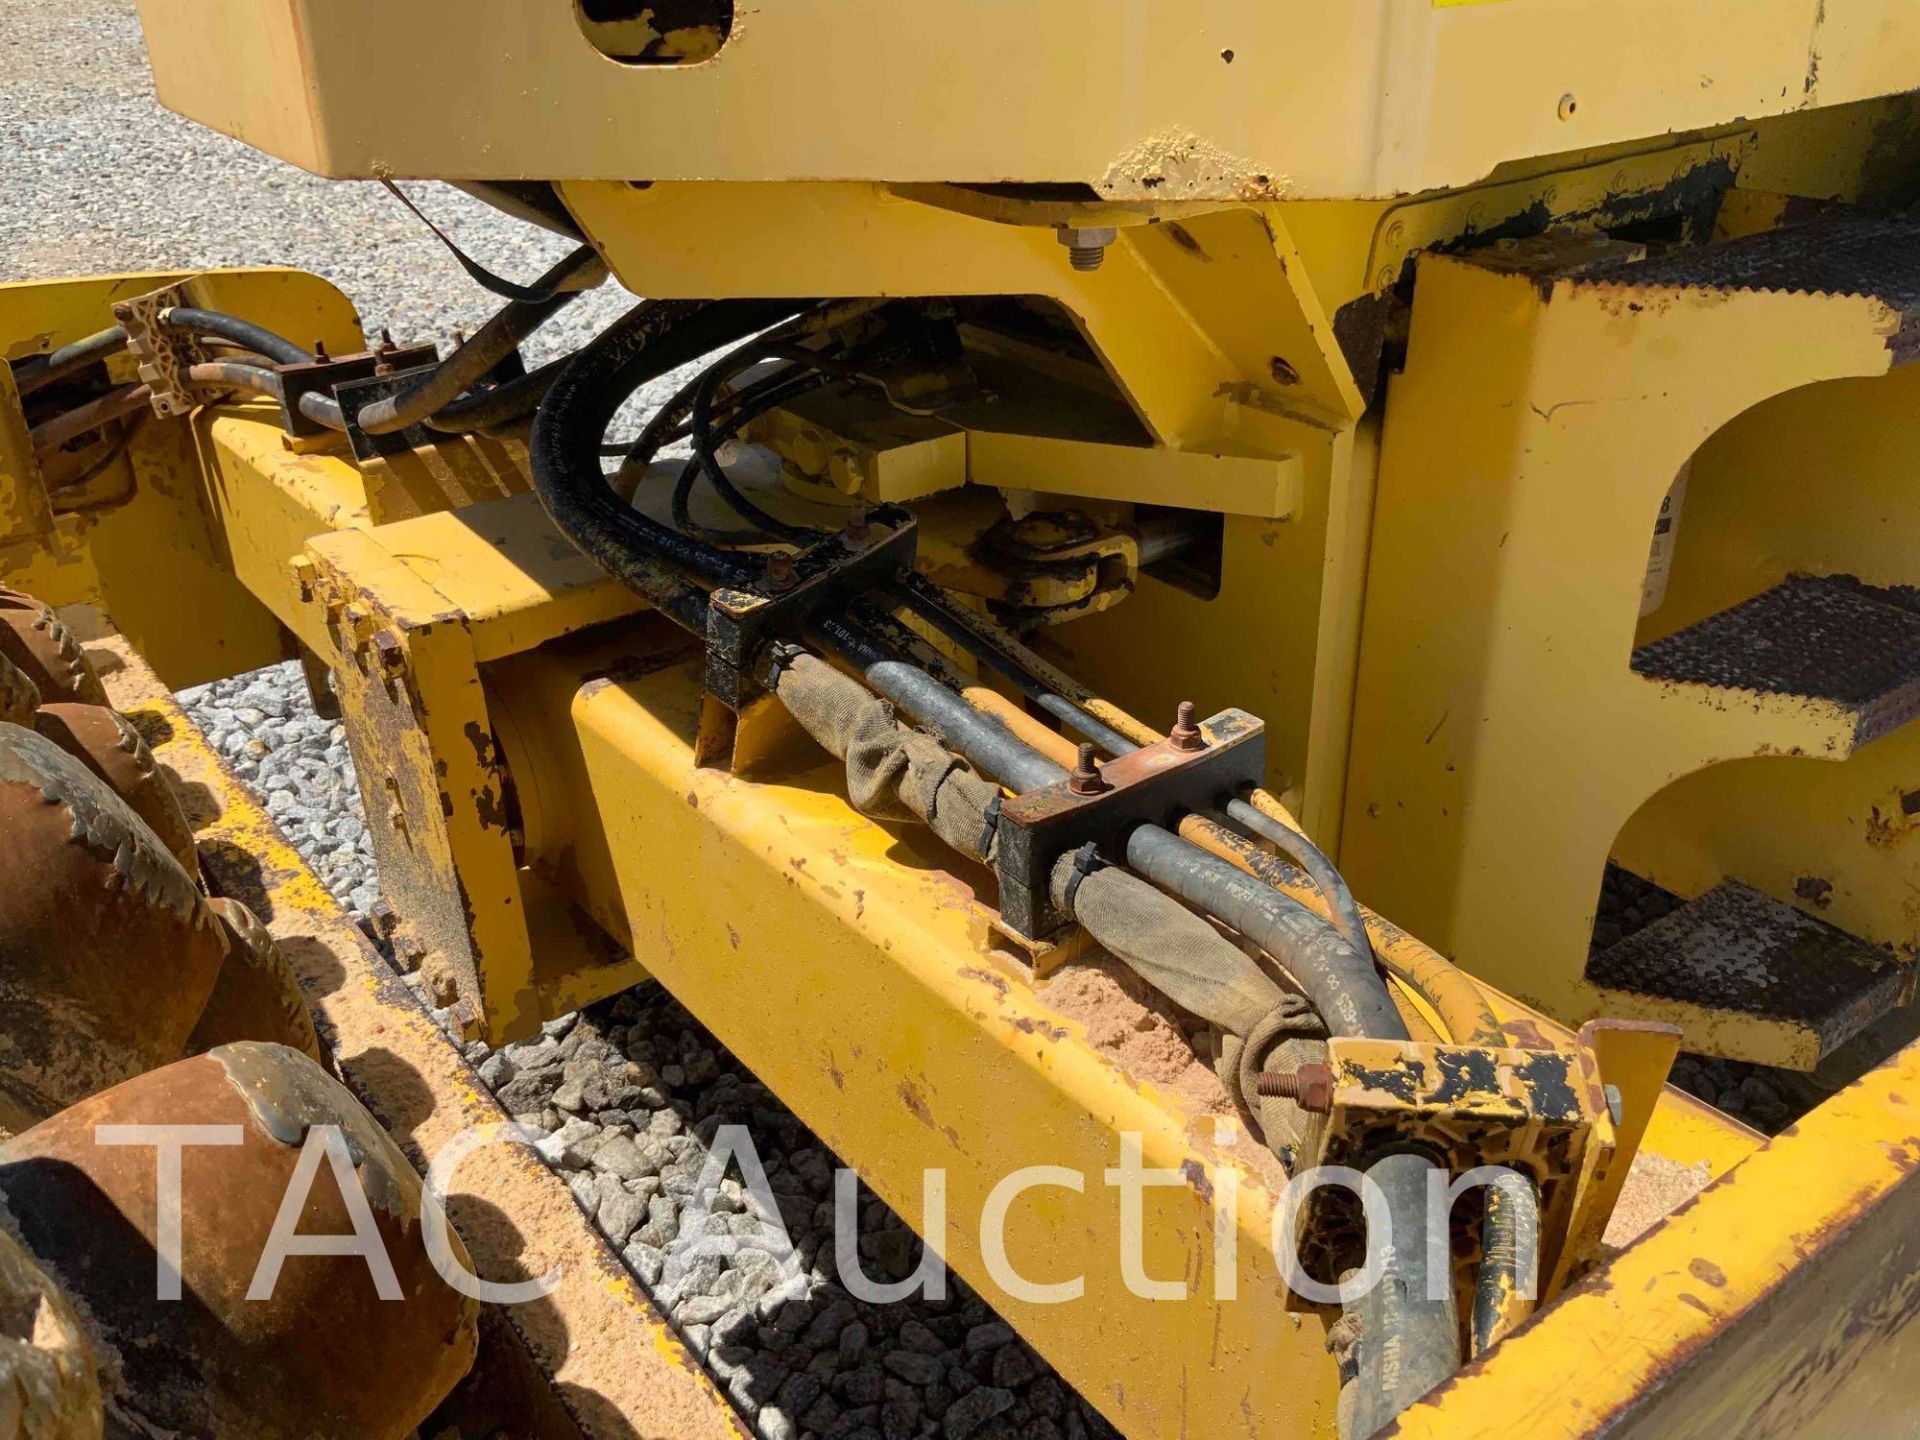 2004 Caterpillar CP-563E Padfoot Vibratory Compactor Roller - Image 30 of 51